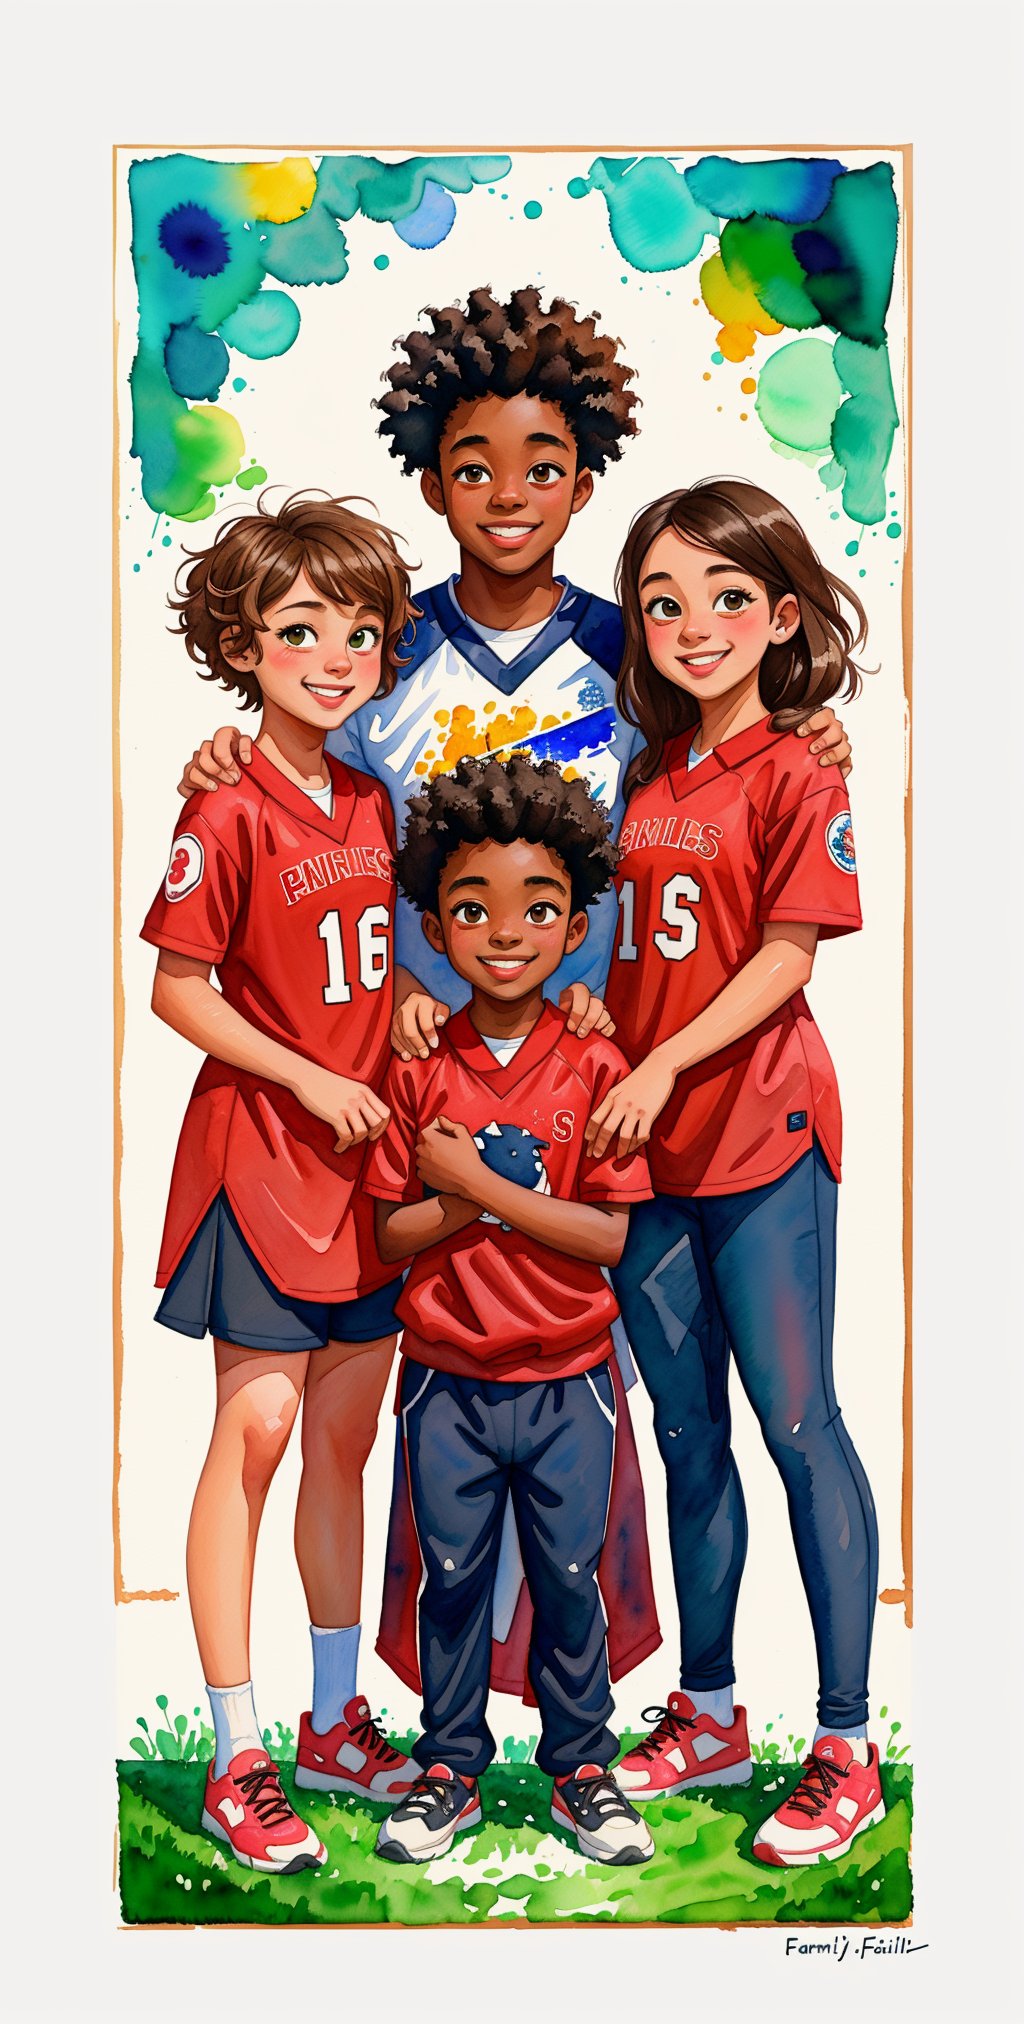 masterpiece,best quality,high quality,1man,2girls,( family portrait),afro hair,smiling,sports outfit,centered frame,((watercolor)) painting,,